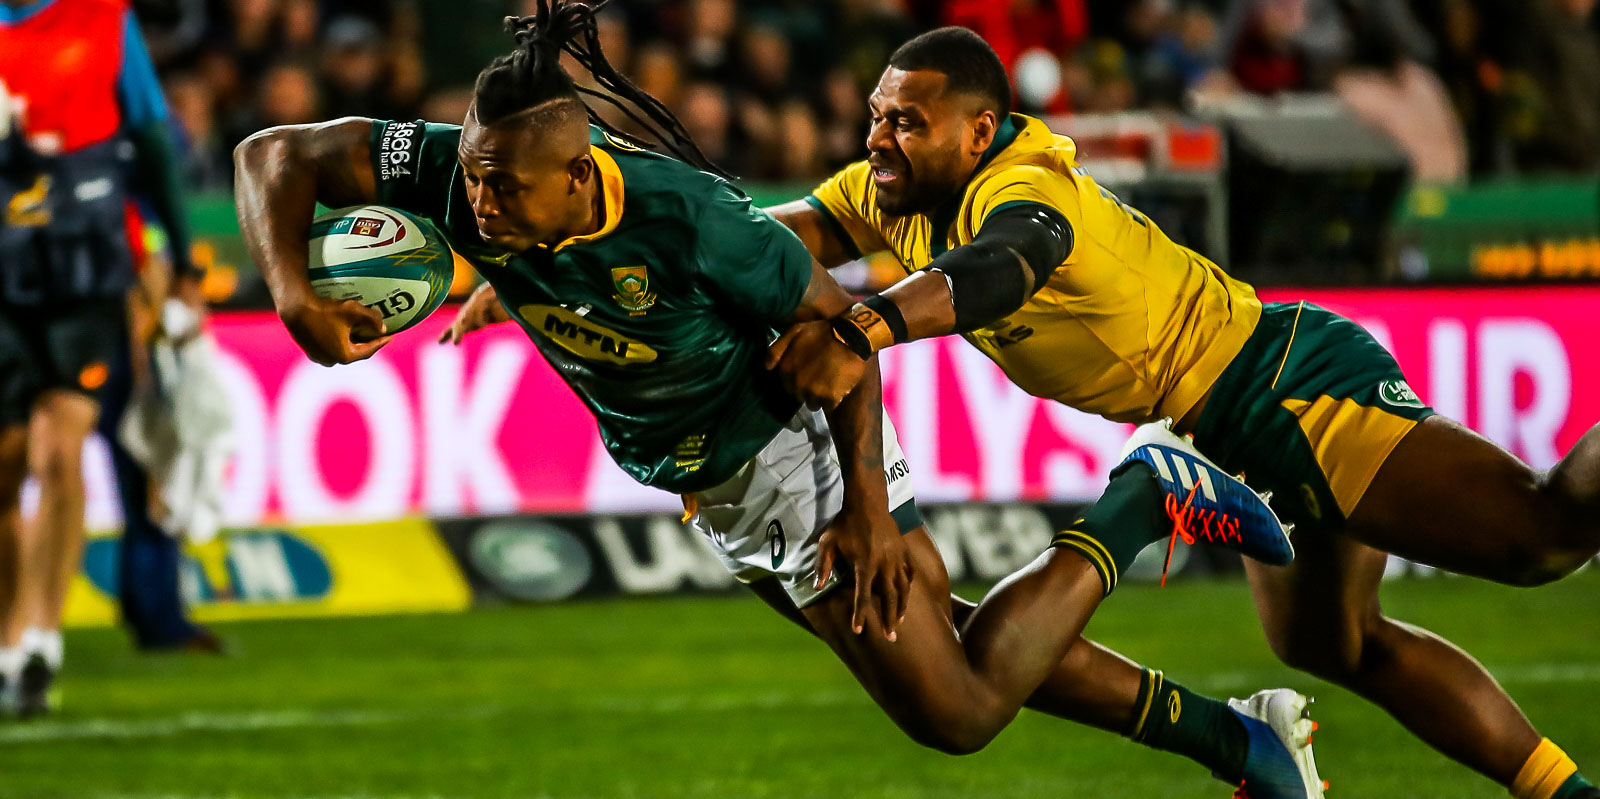 Sbu Nkosi goes over for a try against the Wallabies in 2019.